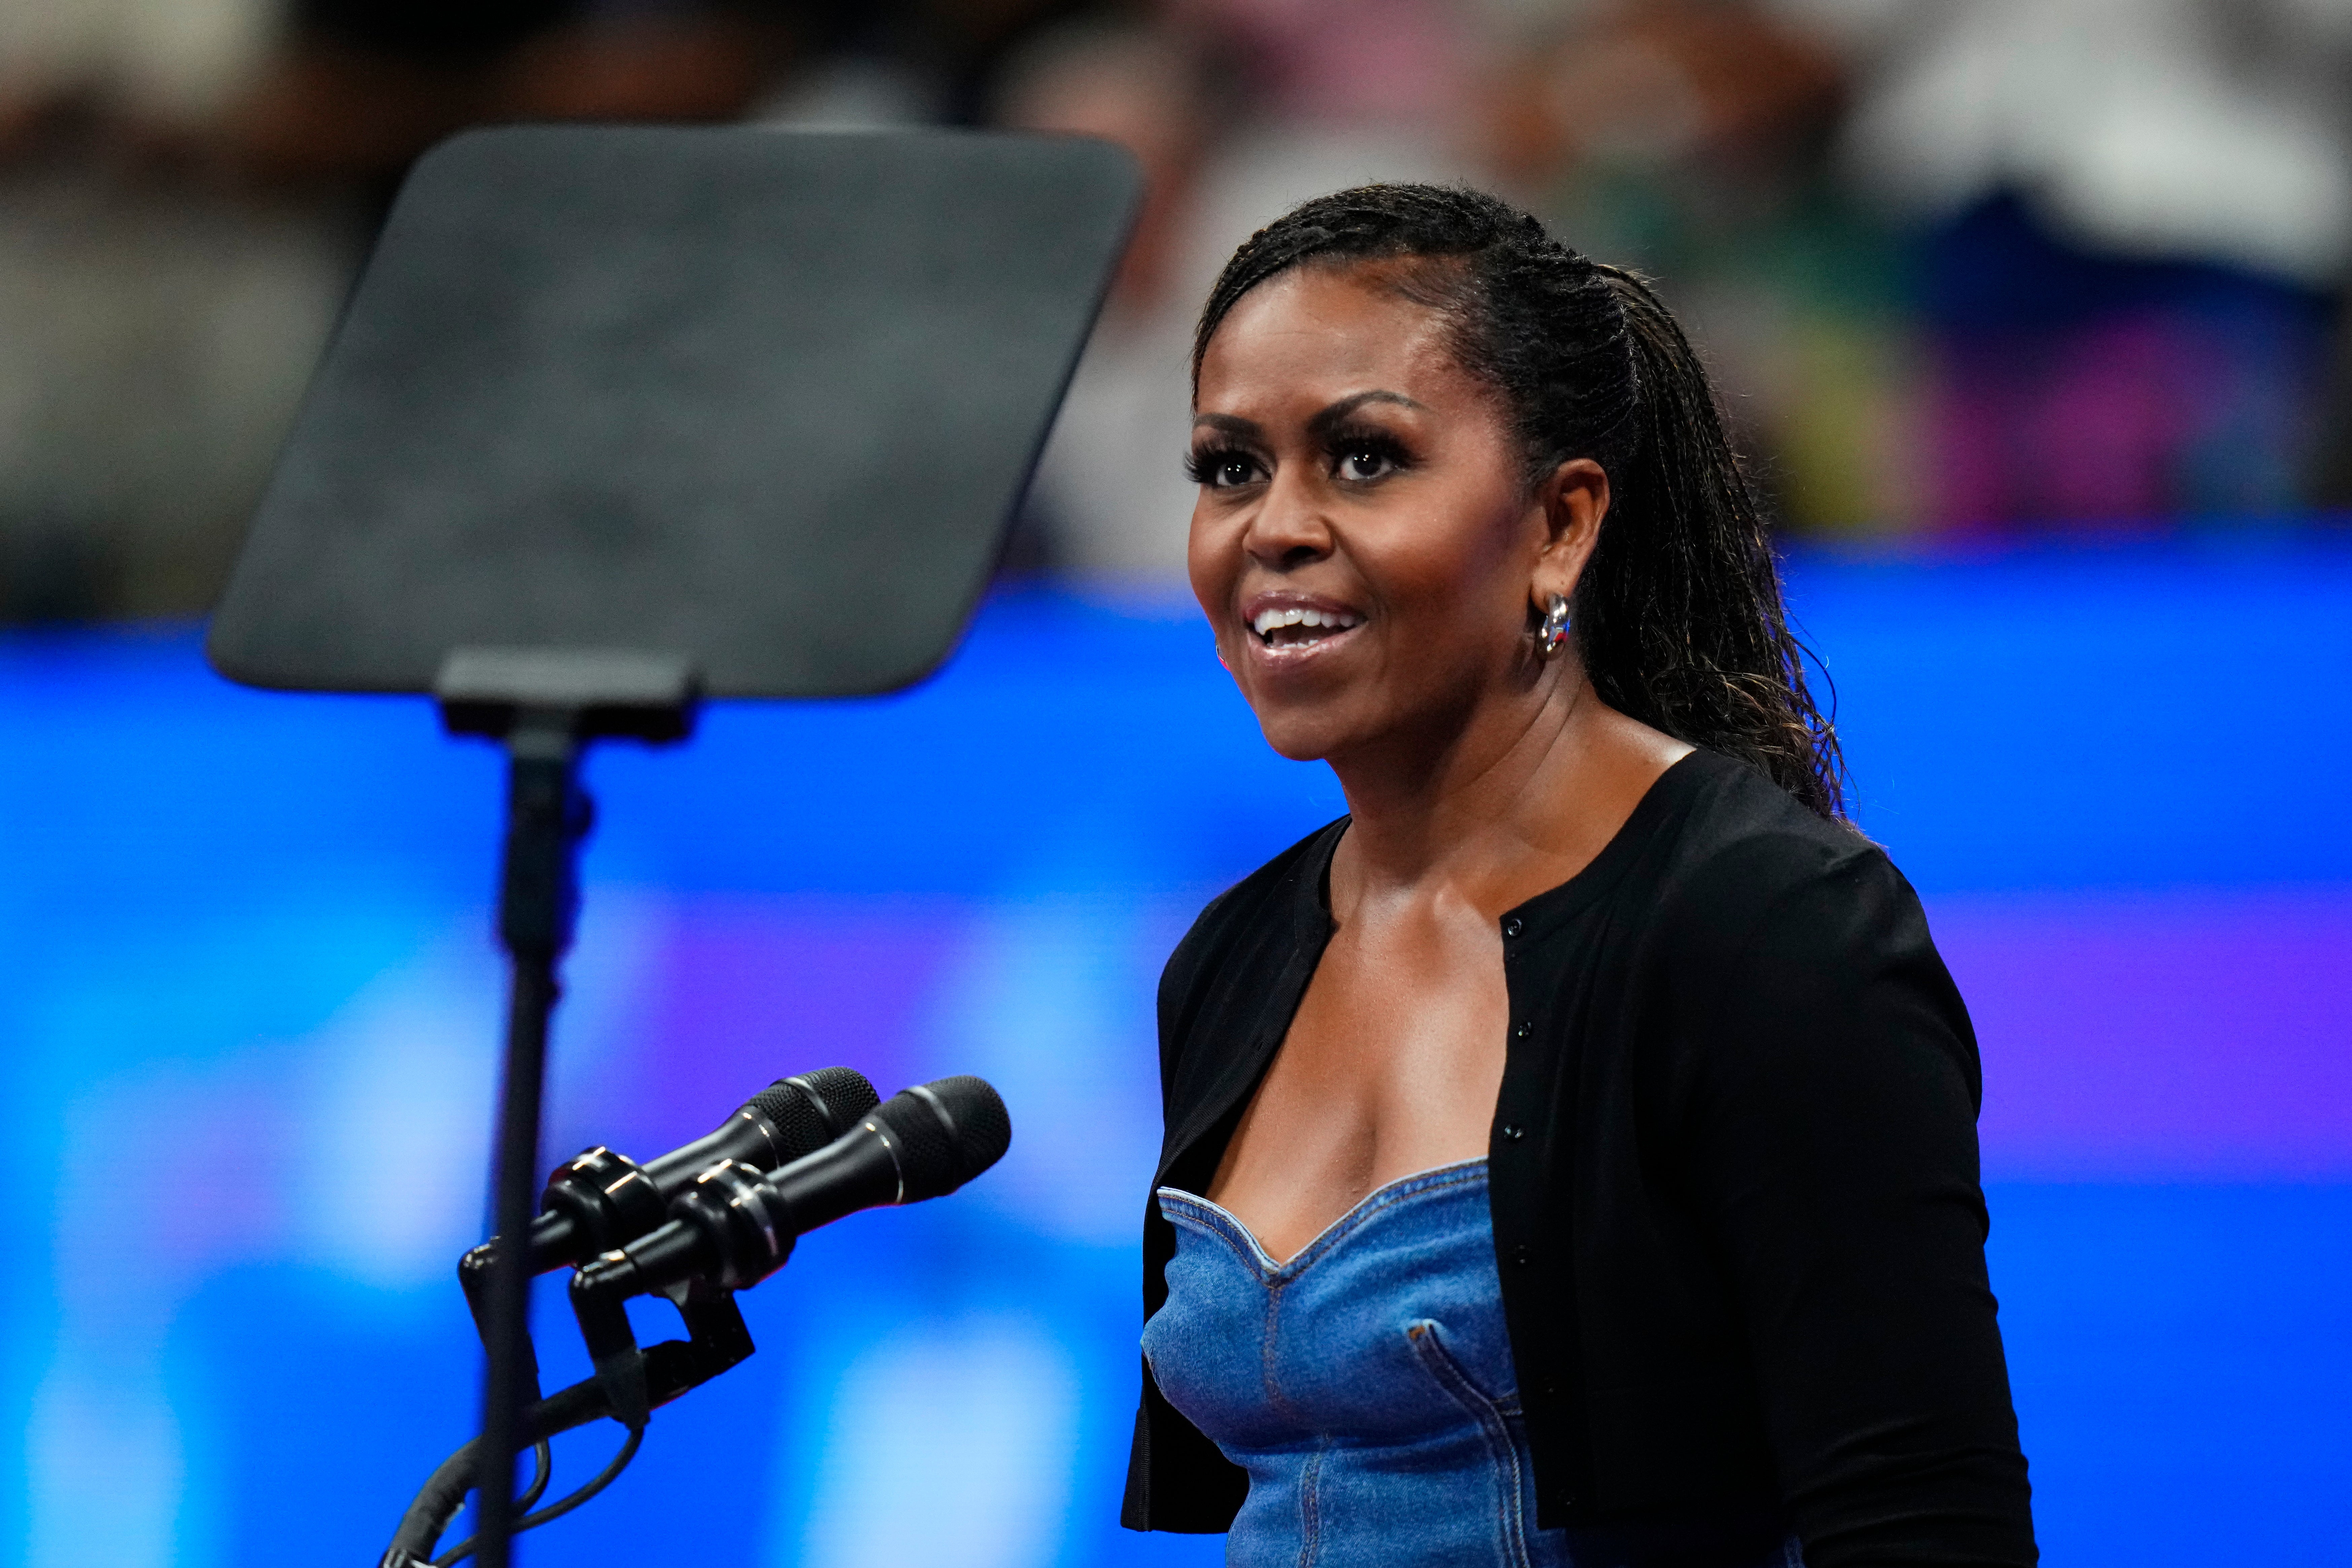 Former first lady Michelle Obama is the only Democrat that could beat Donald Trump in a head-to-head line-up, according to a new poll